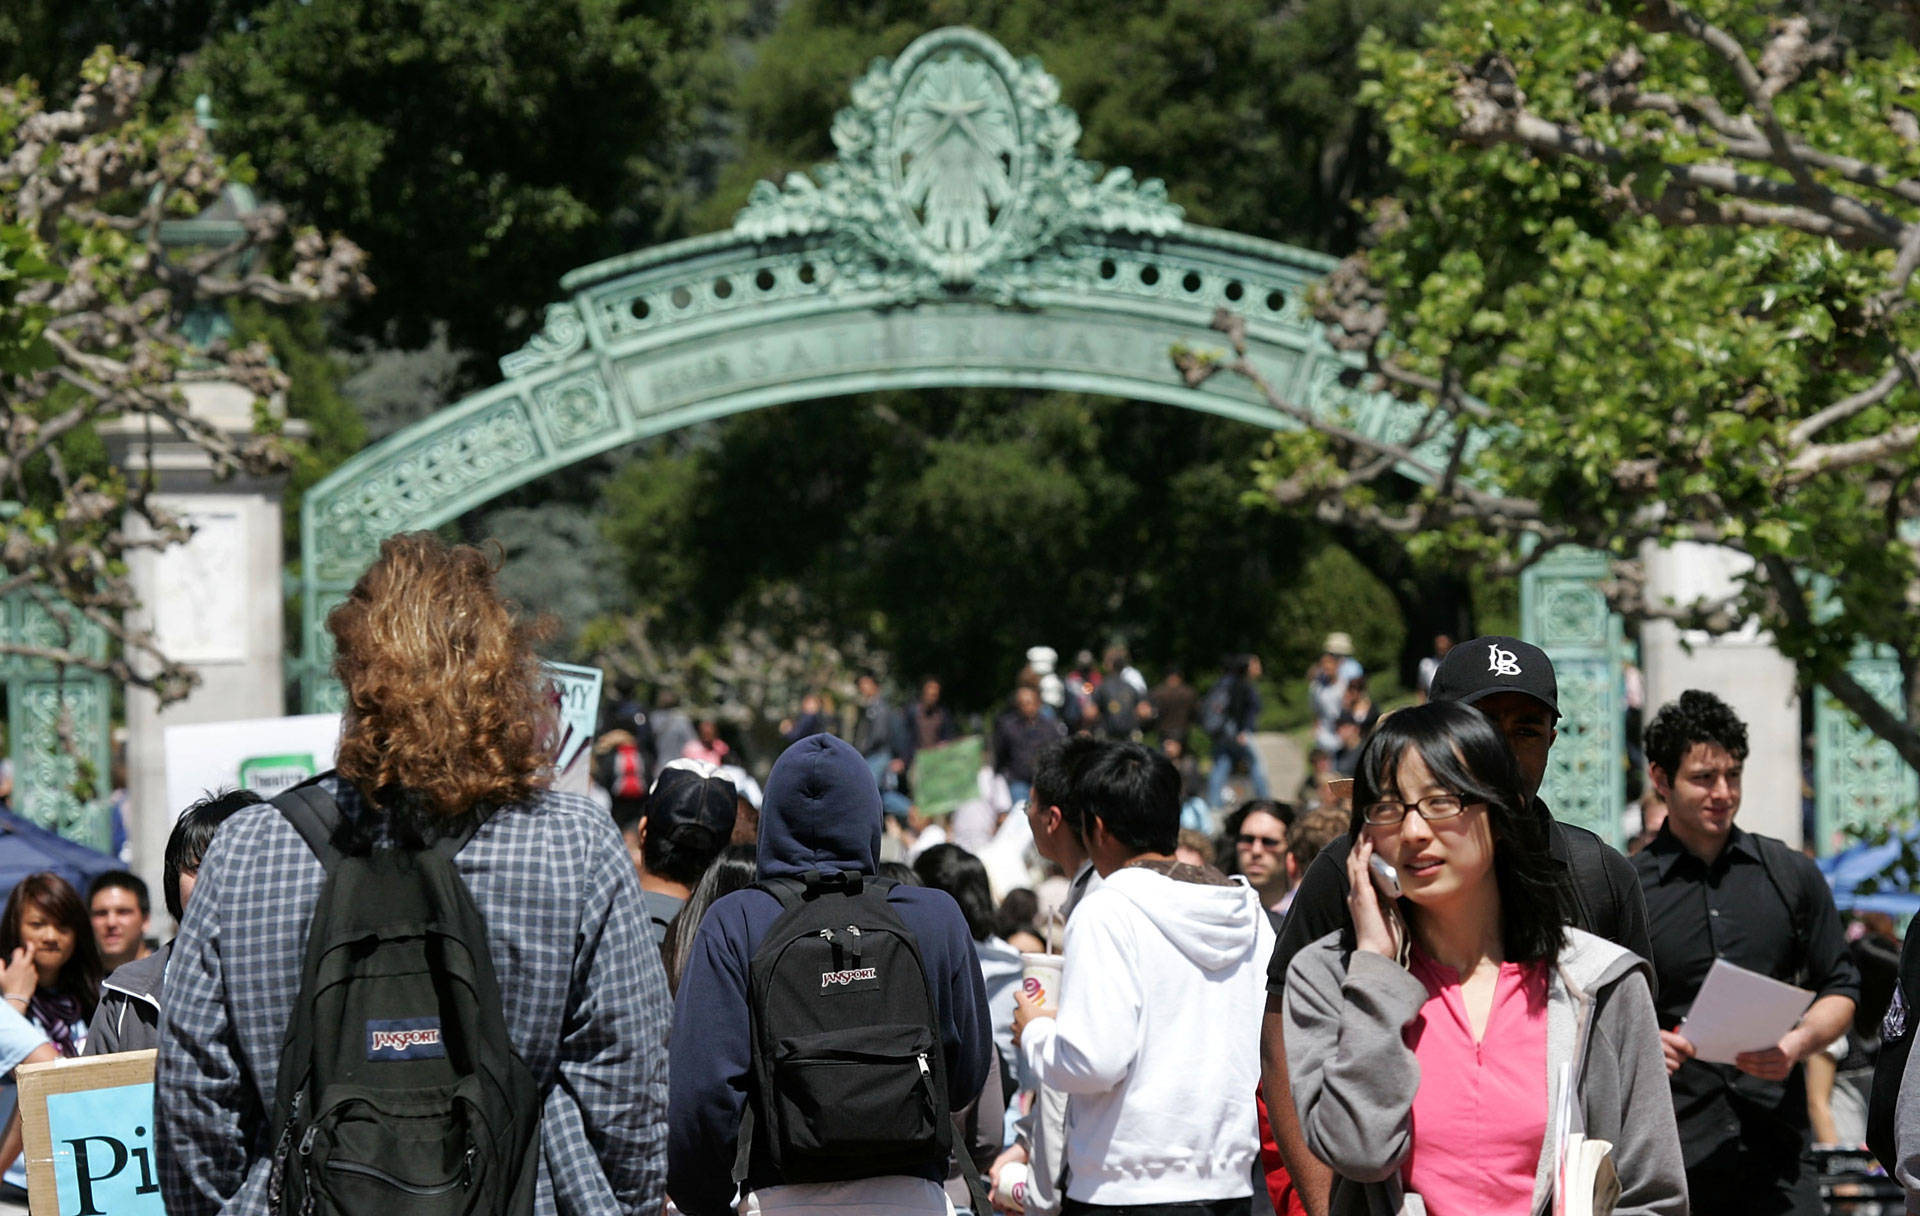 Students walk through Sather Gate at UC Berkeley, one of the nation's most selective public universities. Justin Sullivan/Getty Images